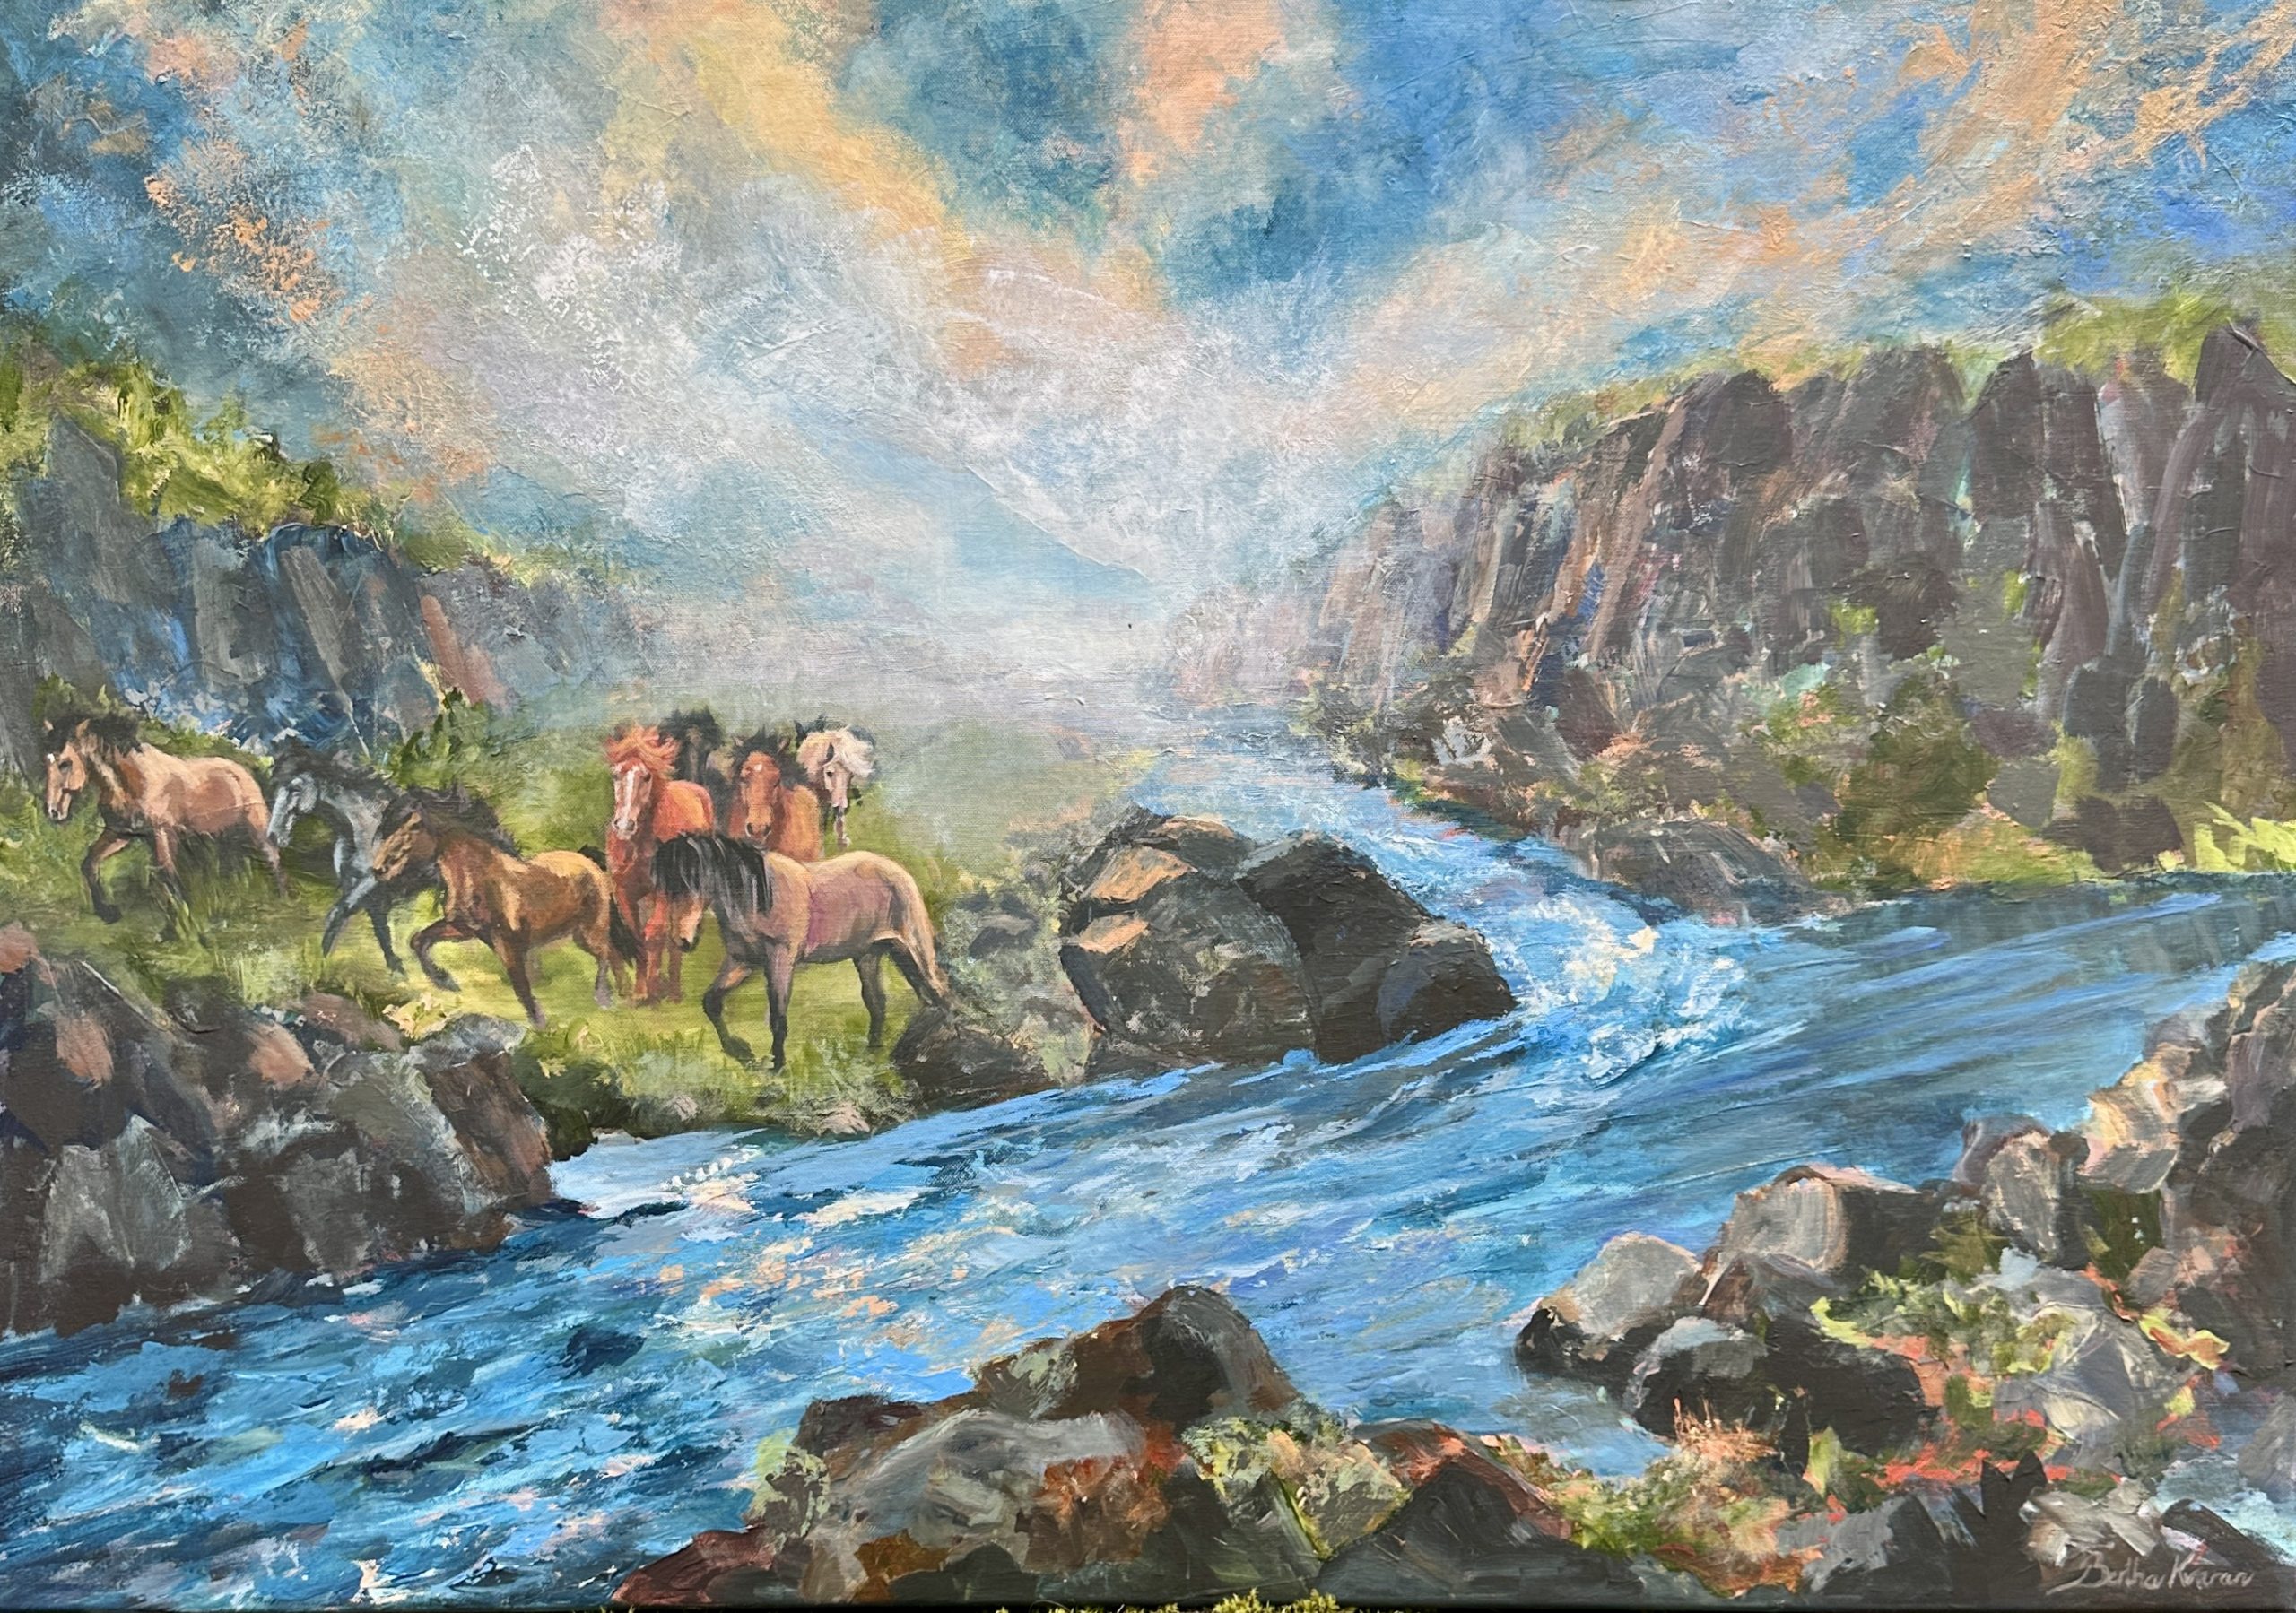 In perfect harmony with nature, a herd of horses walking in an Icelandic landscape, painting by Bertha Kvaran